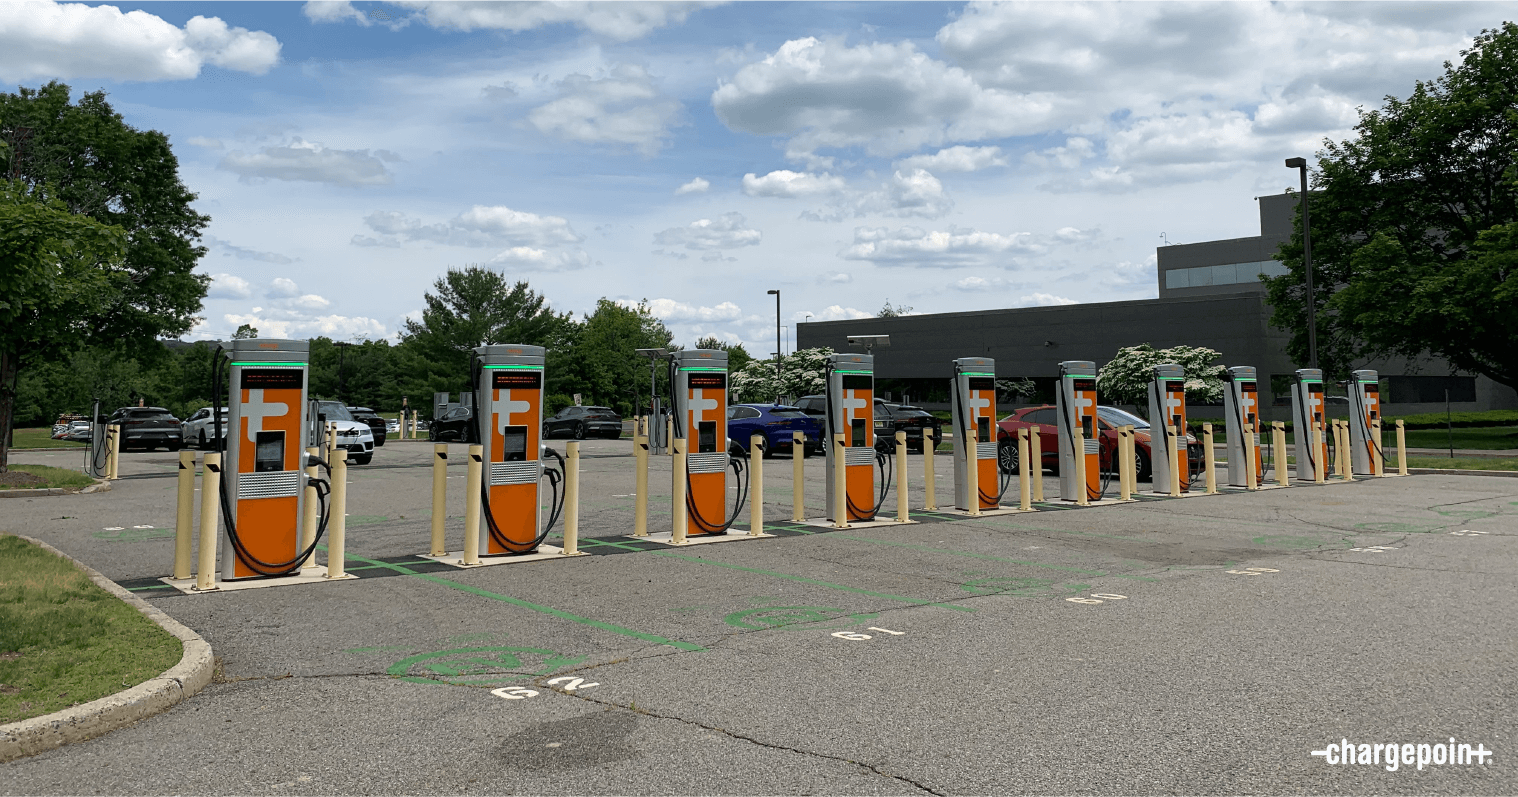 ChargePoint_Expressladestationen_CPE_250